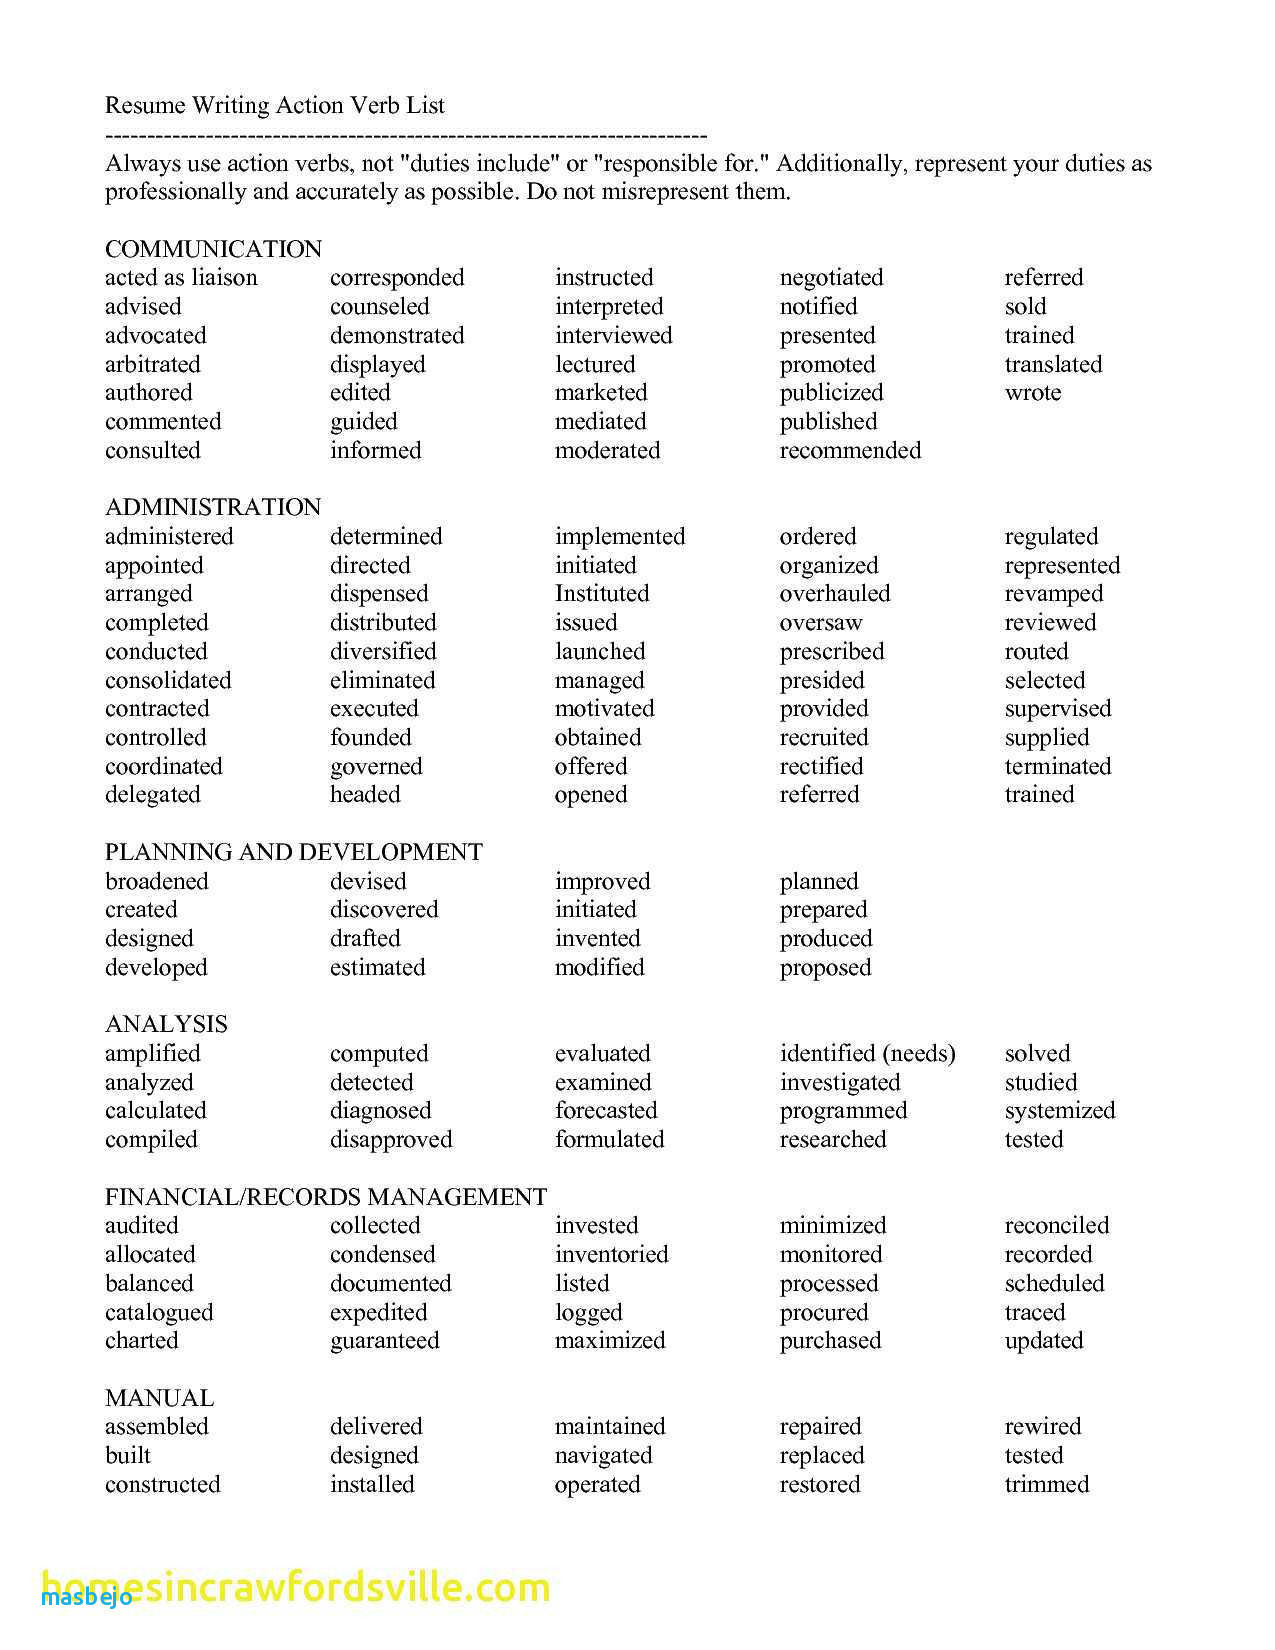 Resume Action Words Action Words Resume Lovely Resume Action Verbs Lovely Resume Action Words Power Words Resume Go Of Action Words Resume resume action words|wikiresume.com